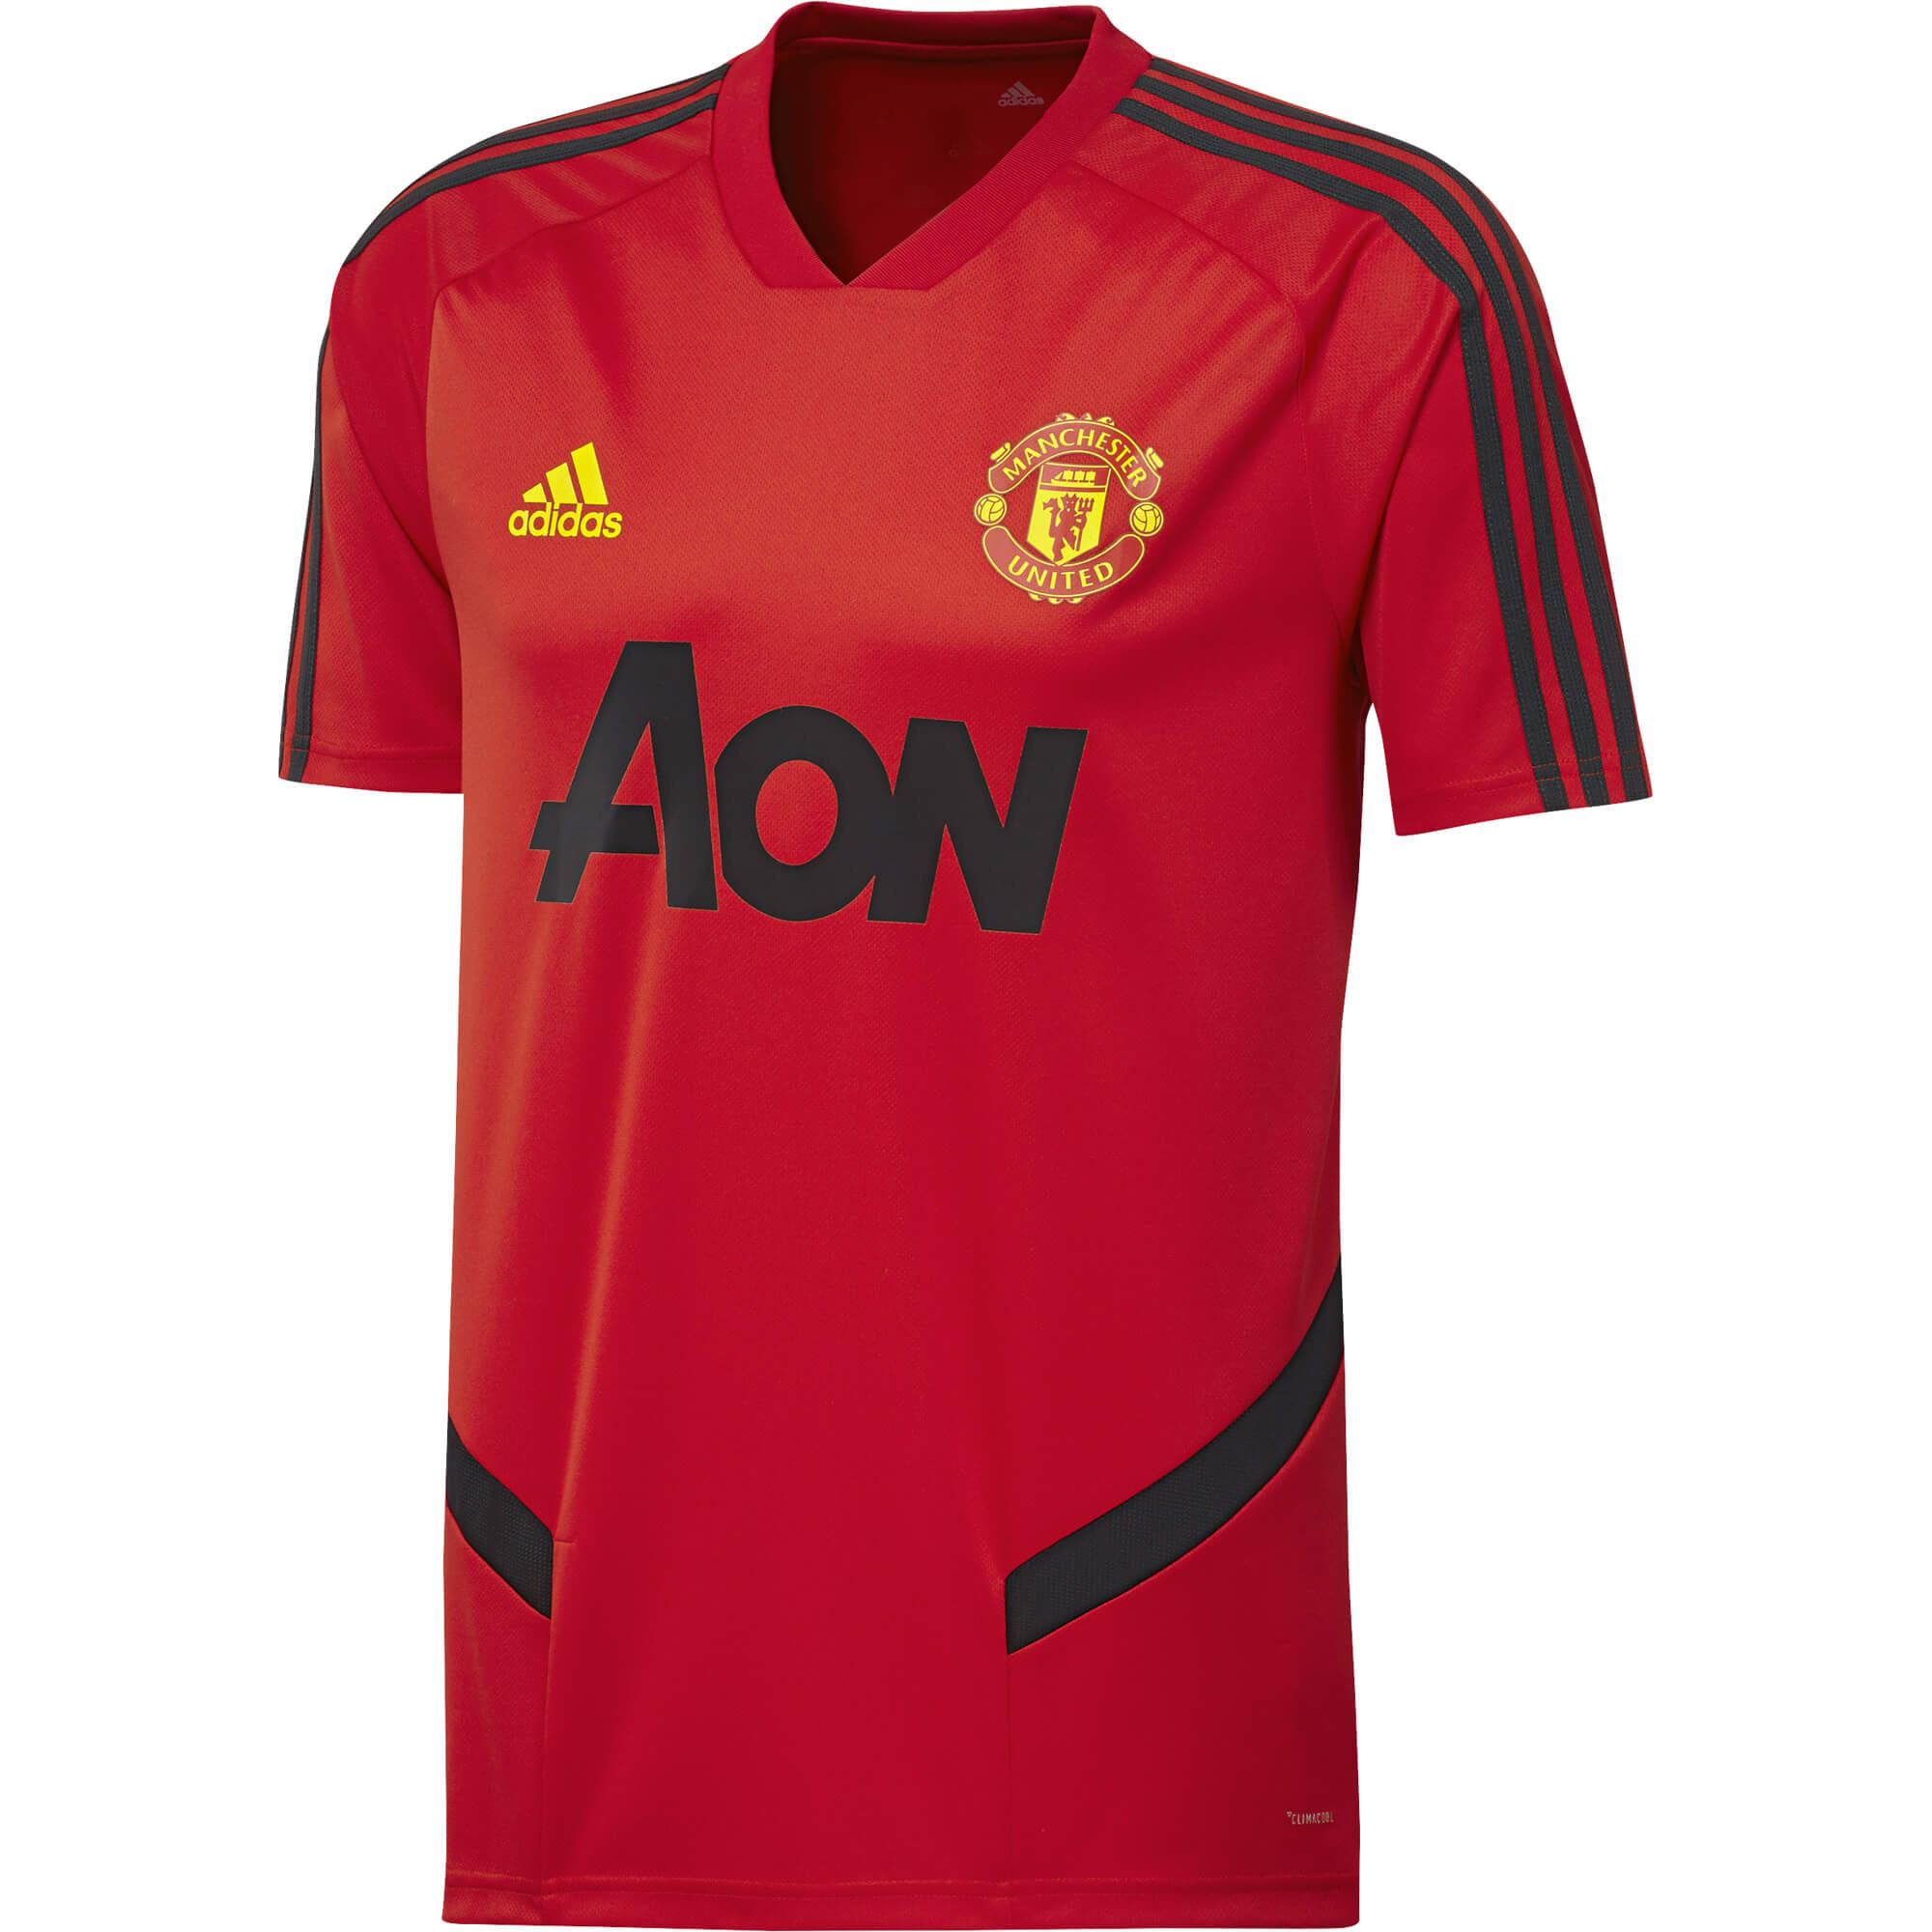 ADIDAS MANCHESTER UNITED TRG JSY ROUGE 2019/2020